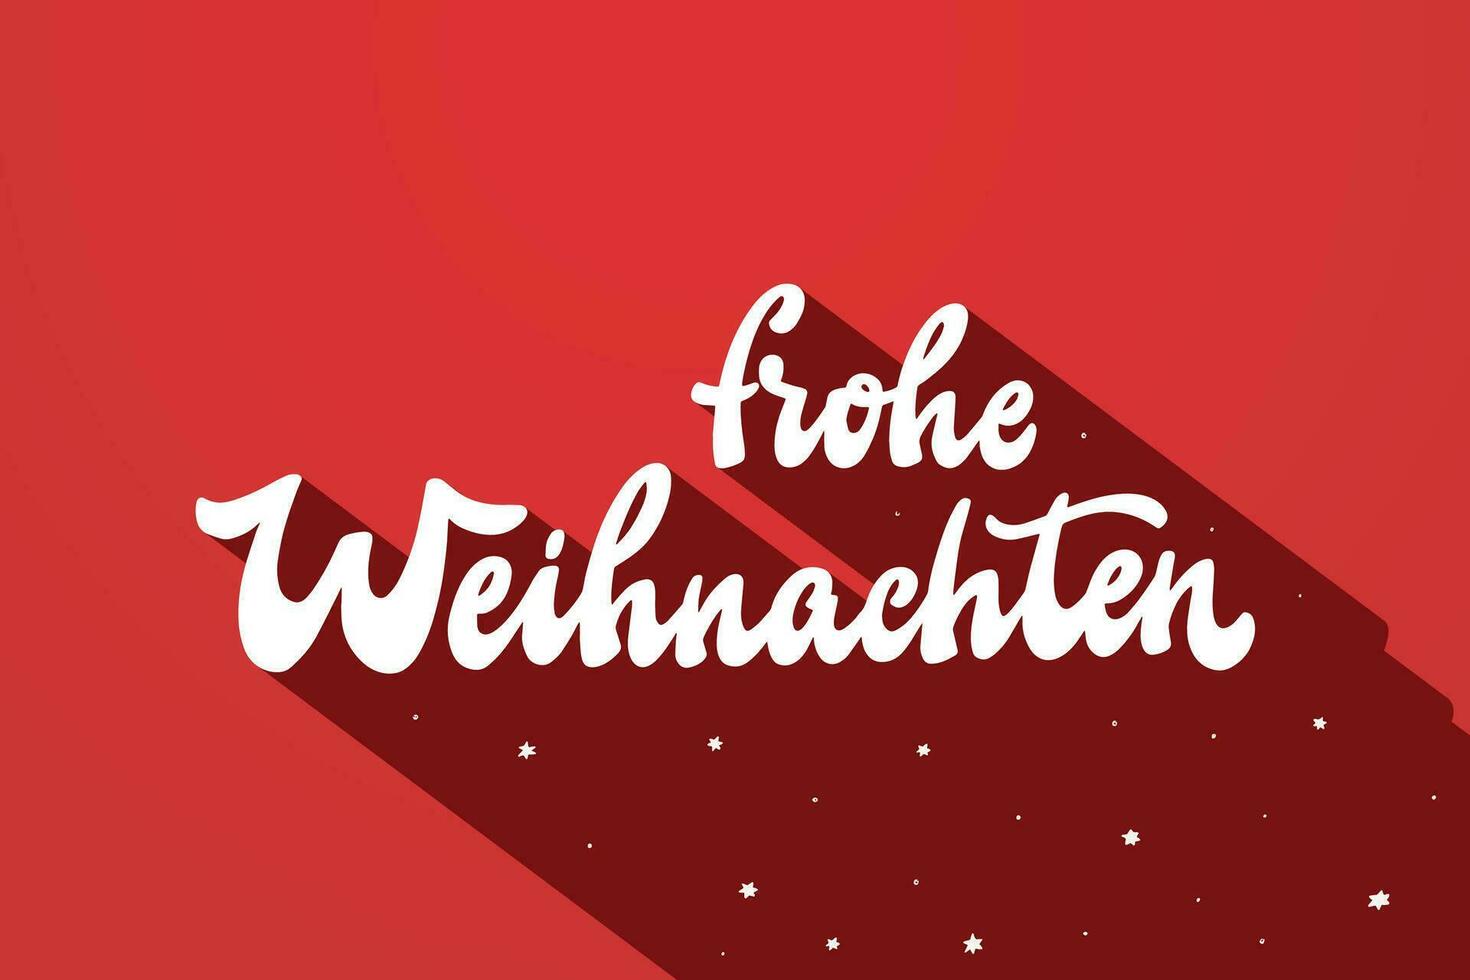 German lettering quote Frohe Weihnachten - translation Merry Christmas for prints, cards, banners, signs, invitations, posters, etc. EPS 10 vector